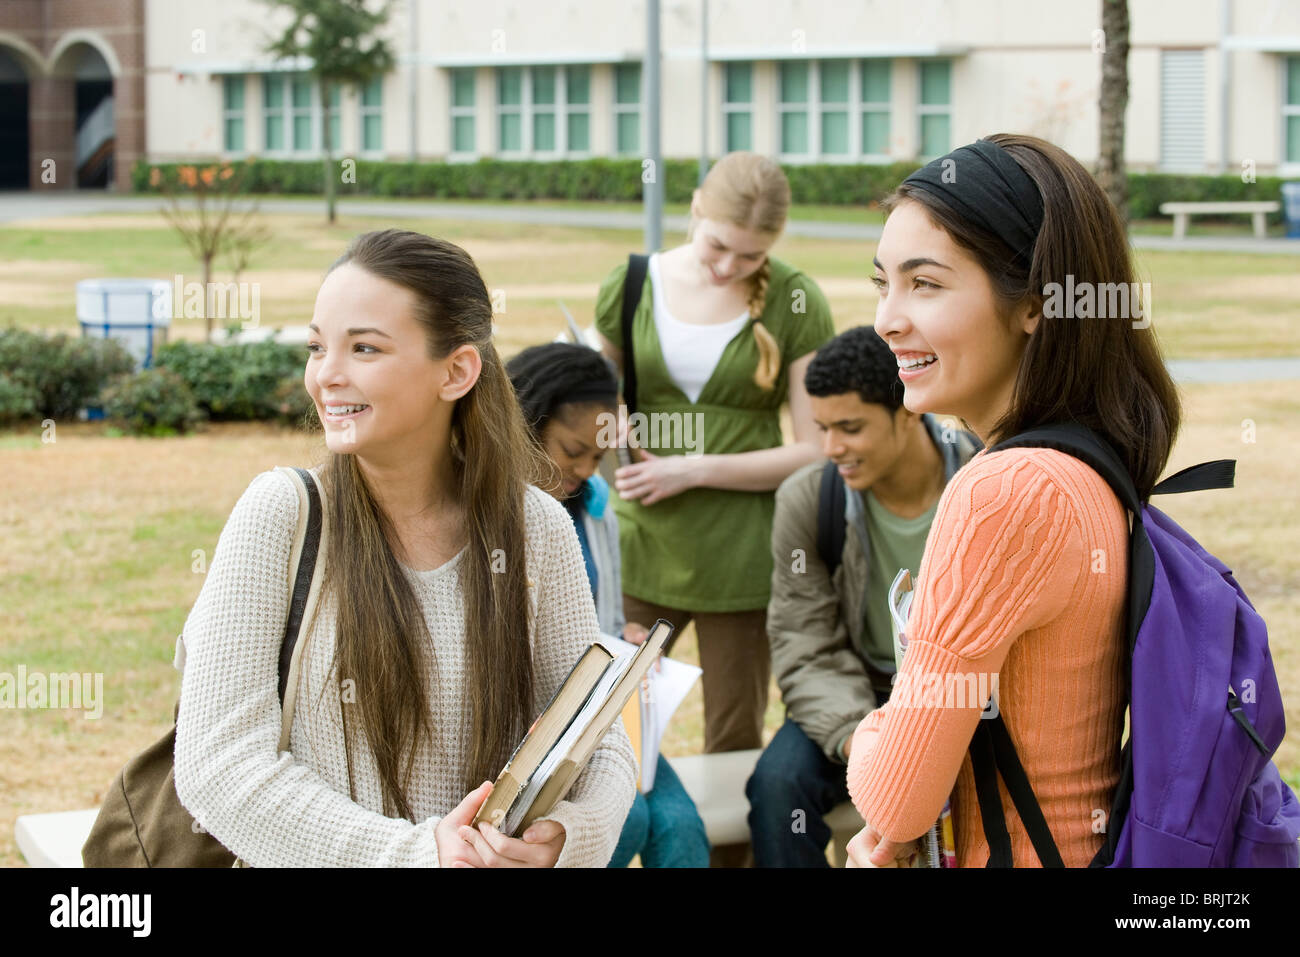 High school students together after school Stock Photo